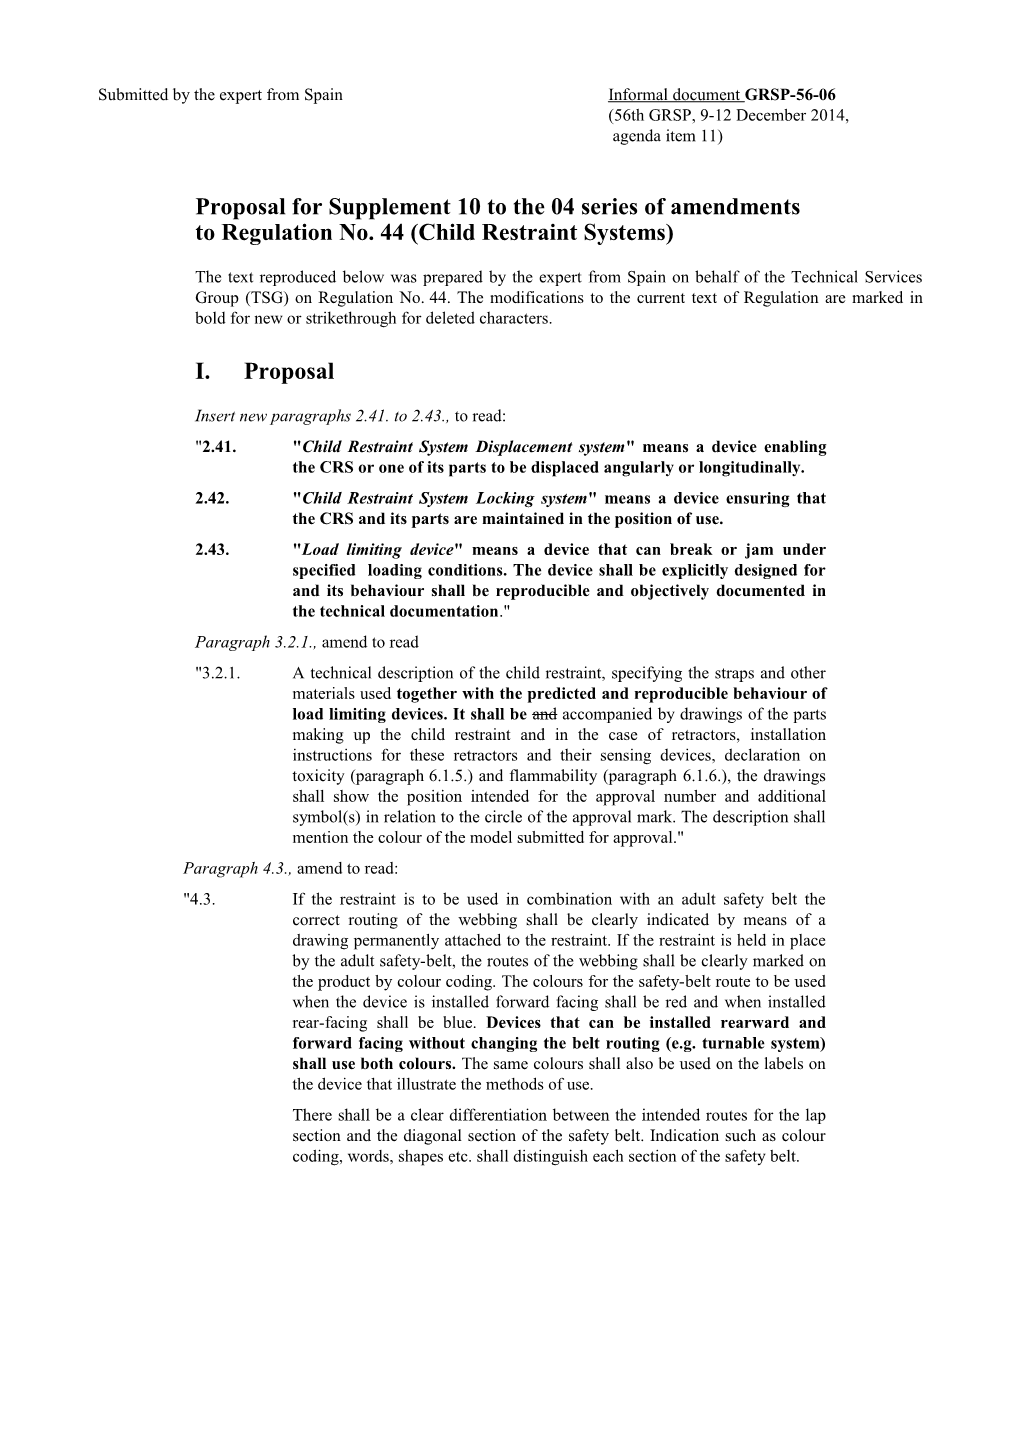 Proposal for Supplement 10 to the 04 Series of Amendments to Regulation No. 44 (Child